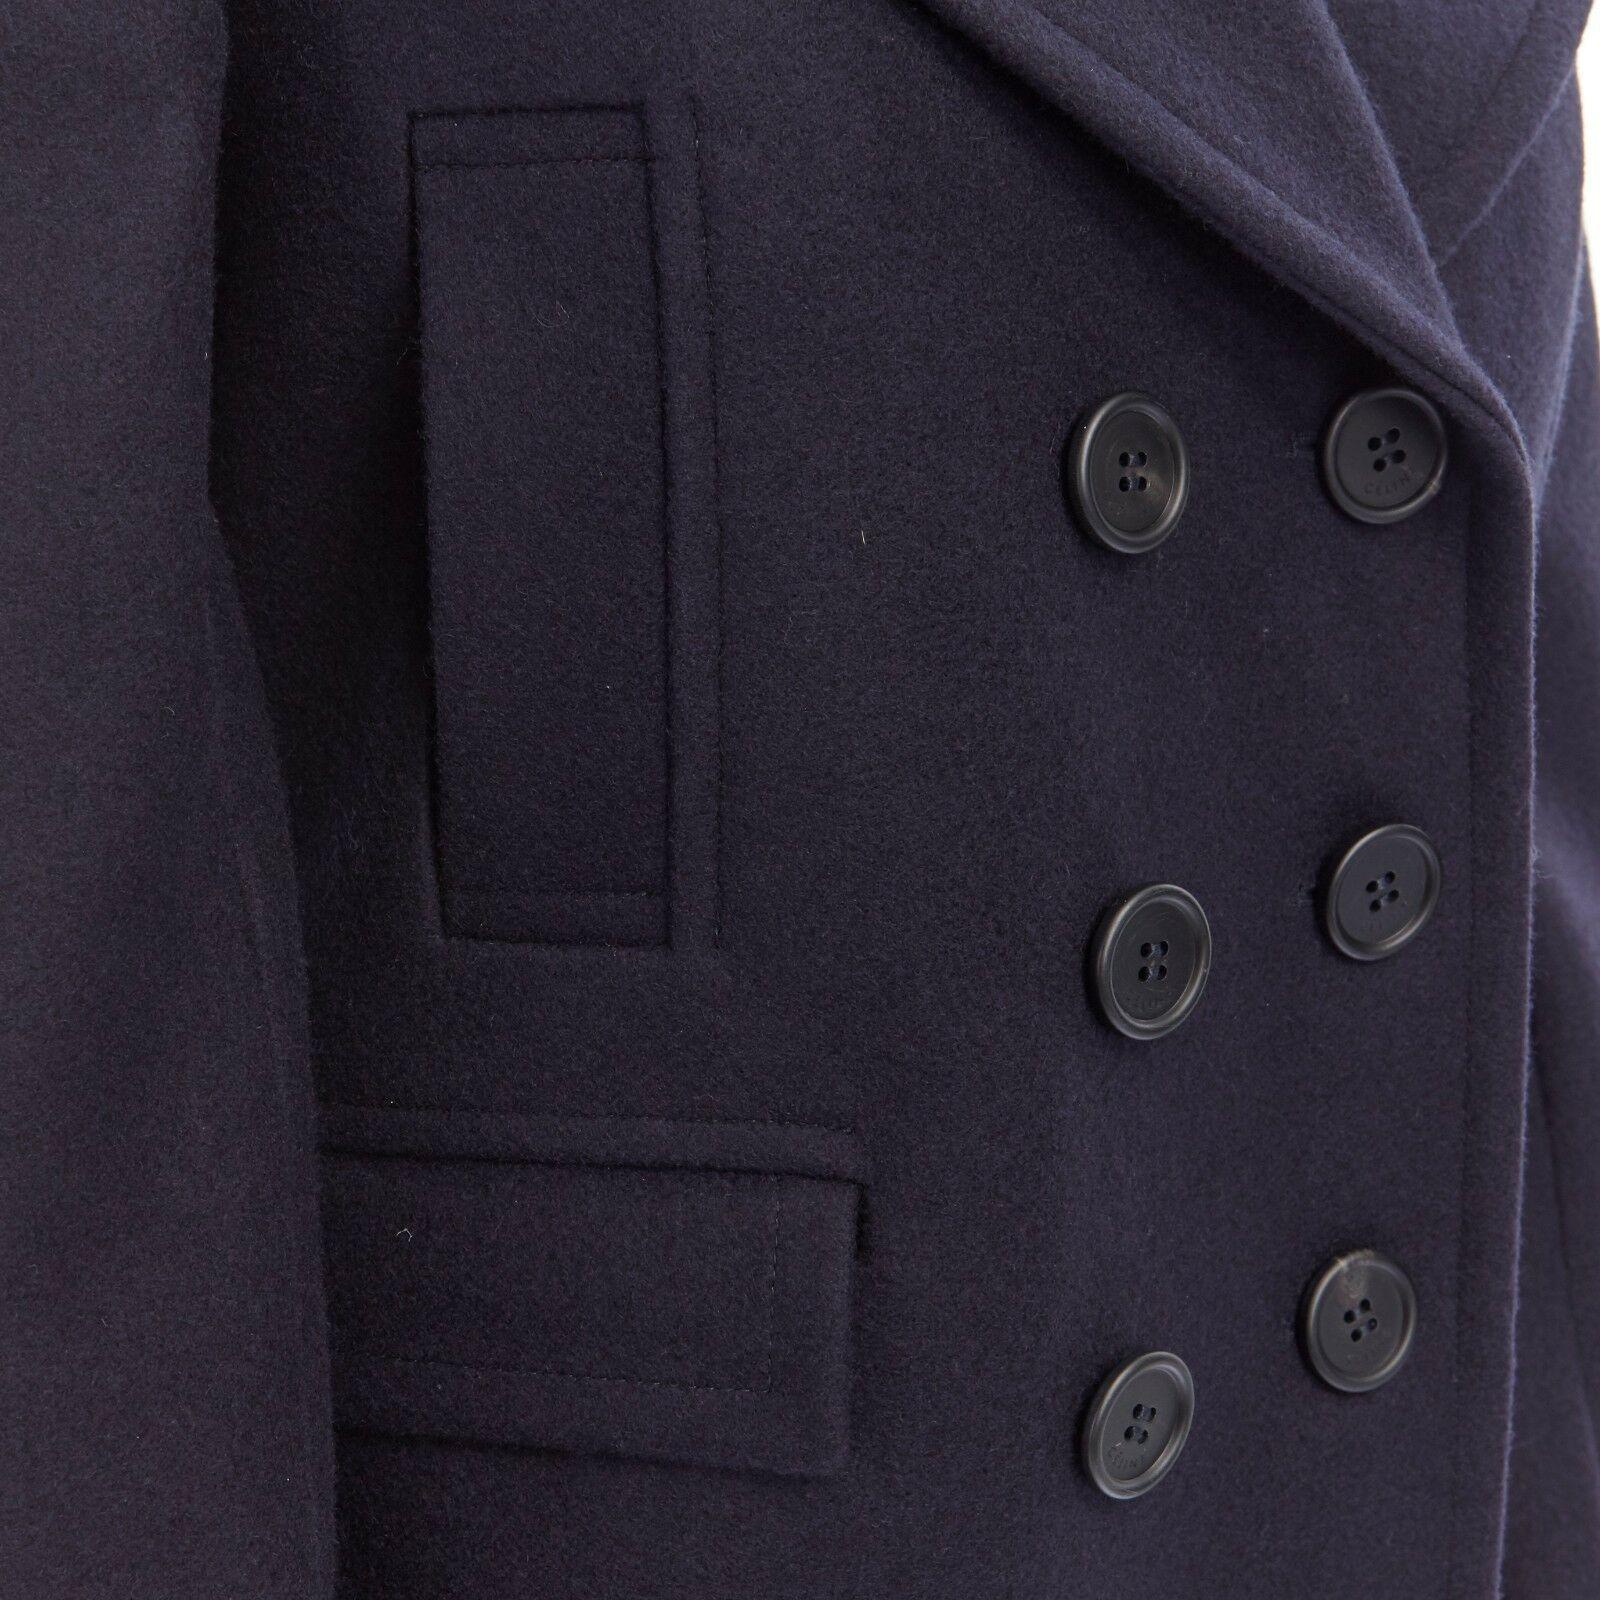 CELINE PHILO navy blue 100% wool wide collar double breasted coat jacket FR36 S

CELINE BY PHOEBE PHILO
100% wool. Navy blue. Extra wide collar. Double breasted button front closure. 4-pocket design. Long sleeves. Dual back vent. Binded seams at